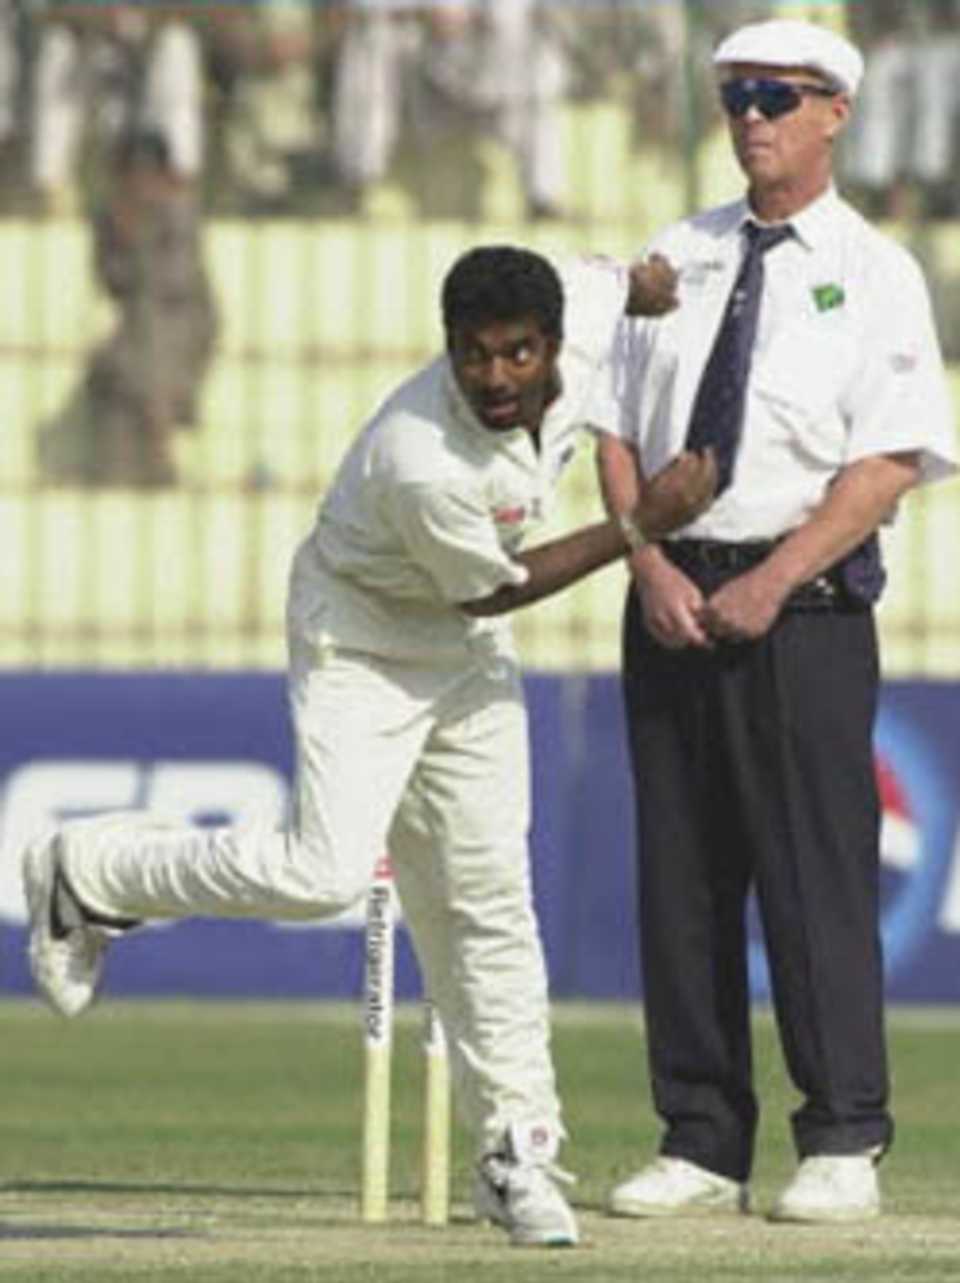 Sri Lankan off-spinner Muttiah Muralitharan delivers his last over on the final day of play of the 2nd cricket Test match in Peshawar, Pakistan 09 March 2000. Muralitharan took 6-71 while collecting ten wickets in the match and was declared Man of the Match. Sri Lanka defeated Pakistan by 57 runs and won the three Test series by 2-0. English umpire John Hampshire is at (R).